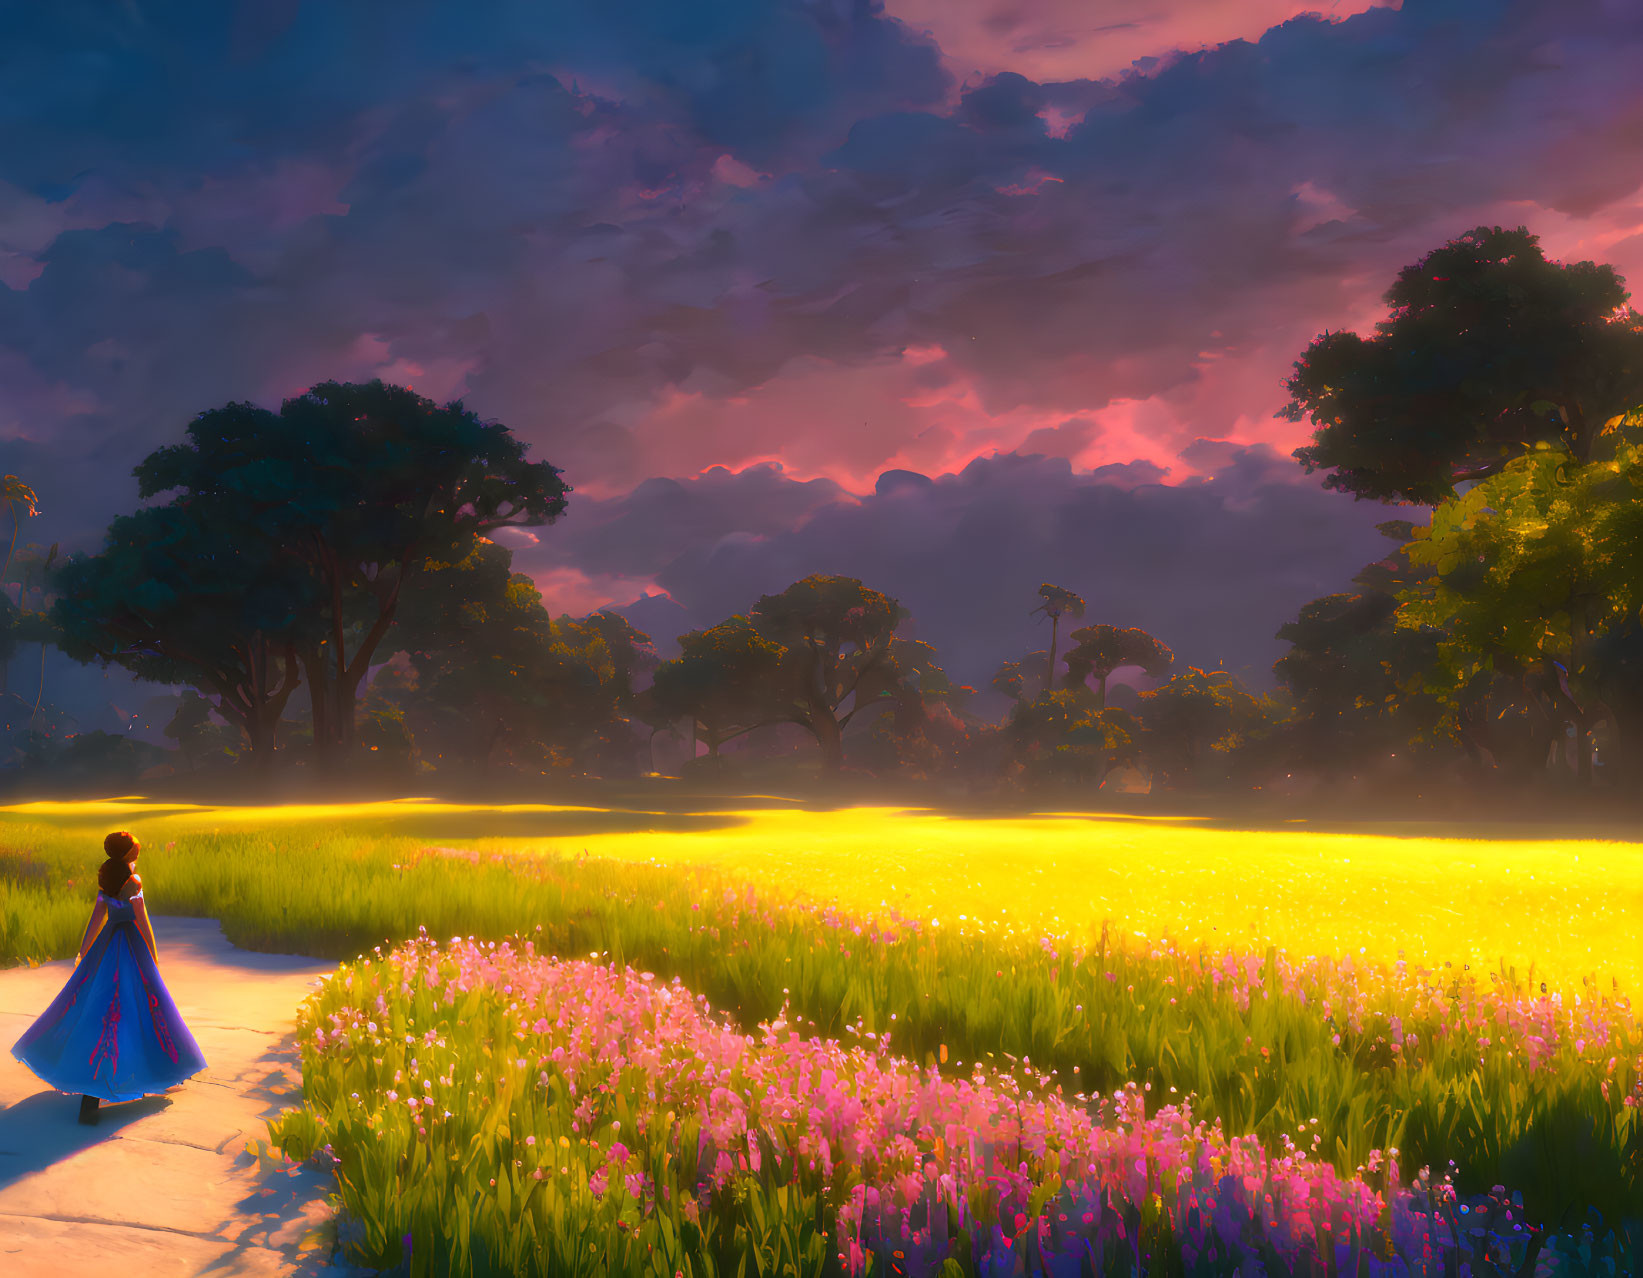 Tranquil sunset landscape with person on path and yellow flowers